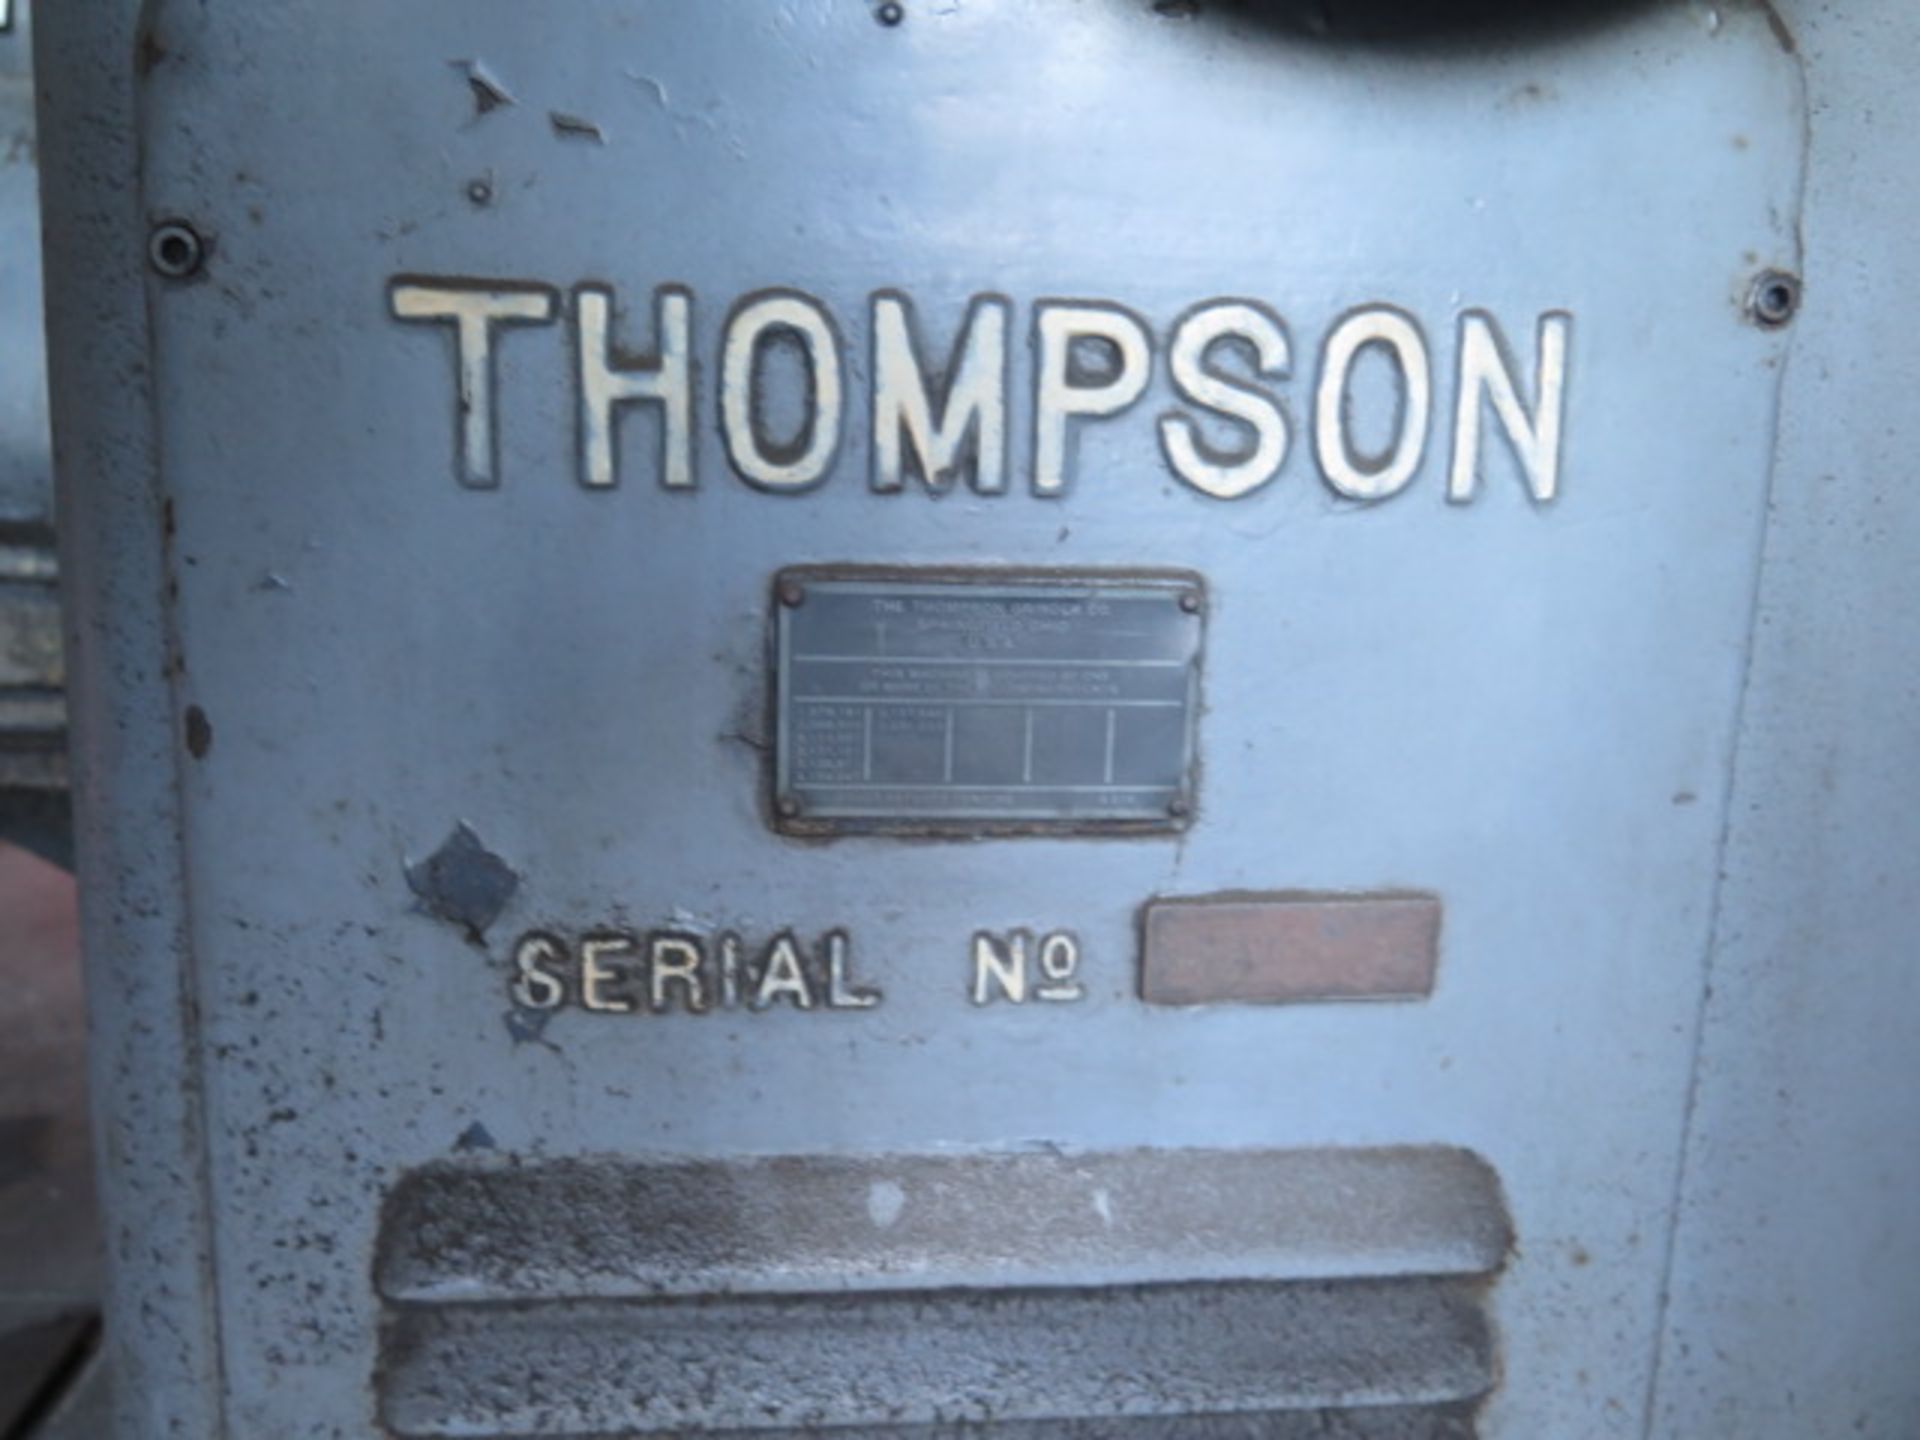 Thompson 12” x 24” Automatic Surface Grinder s/n B21998 w/ Electromag Chuck, Coolant, SOLD AS IS - Image 8 of 8